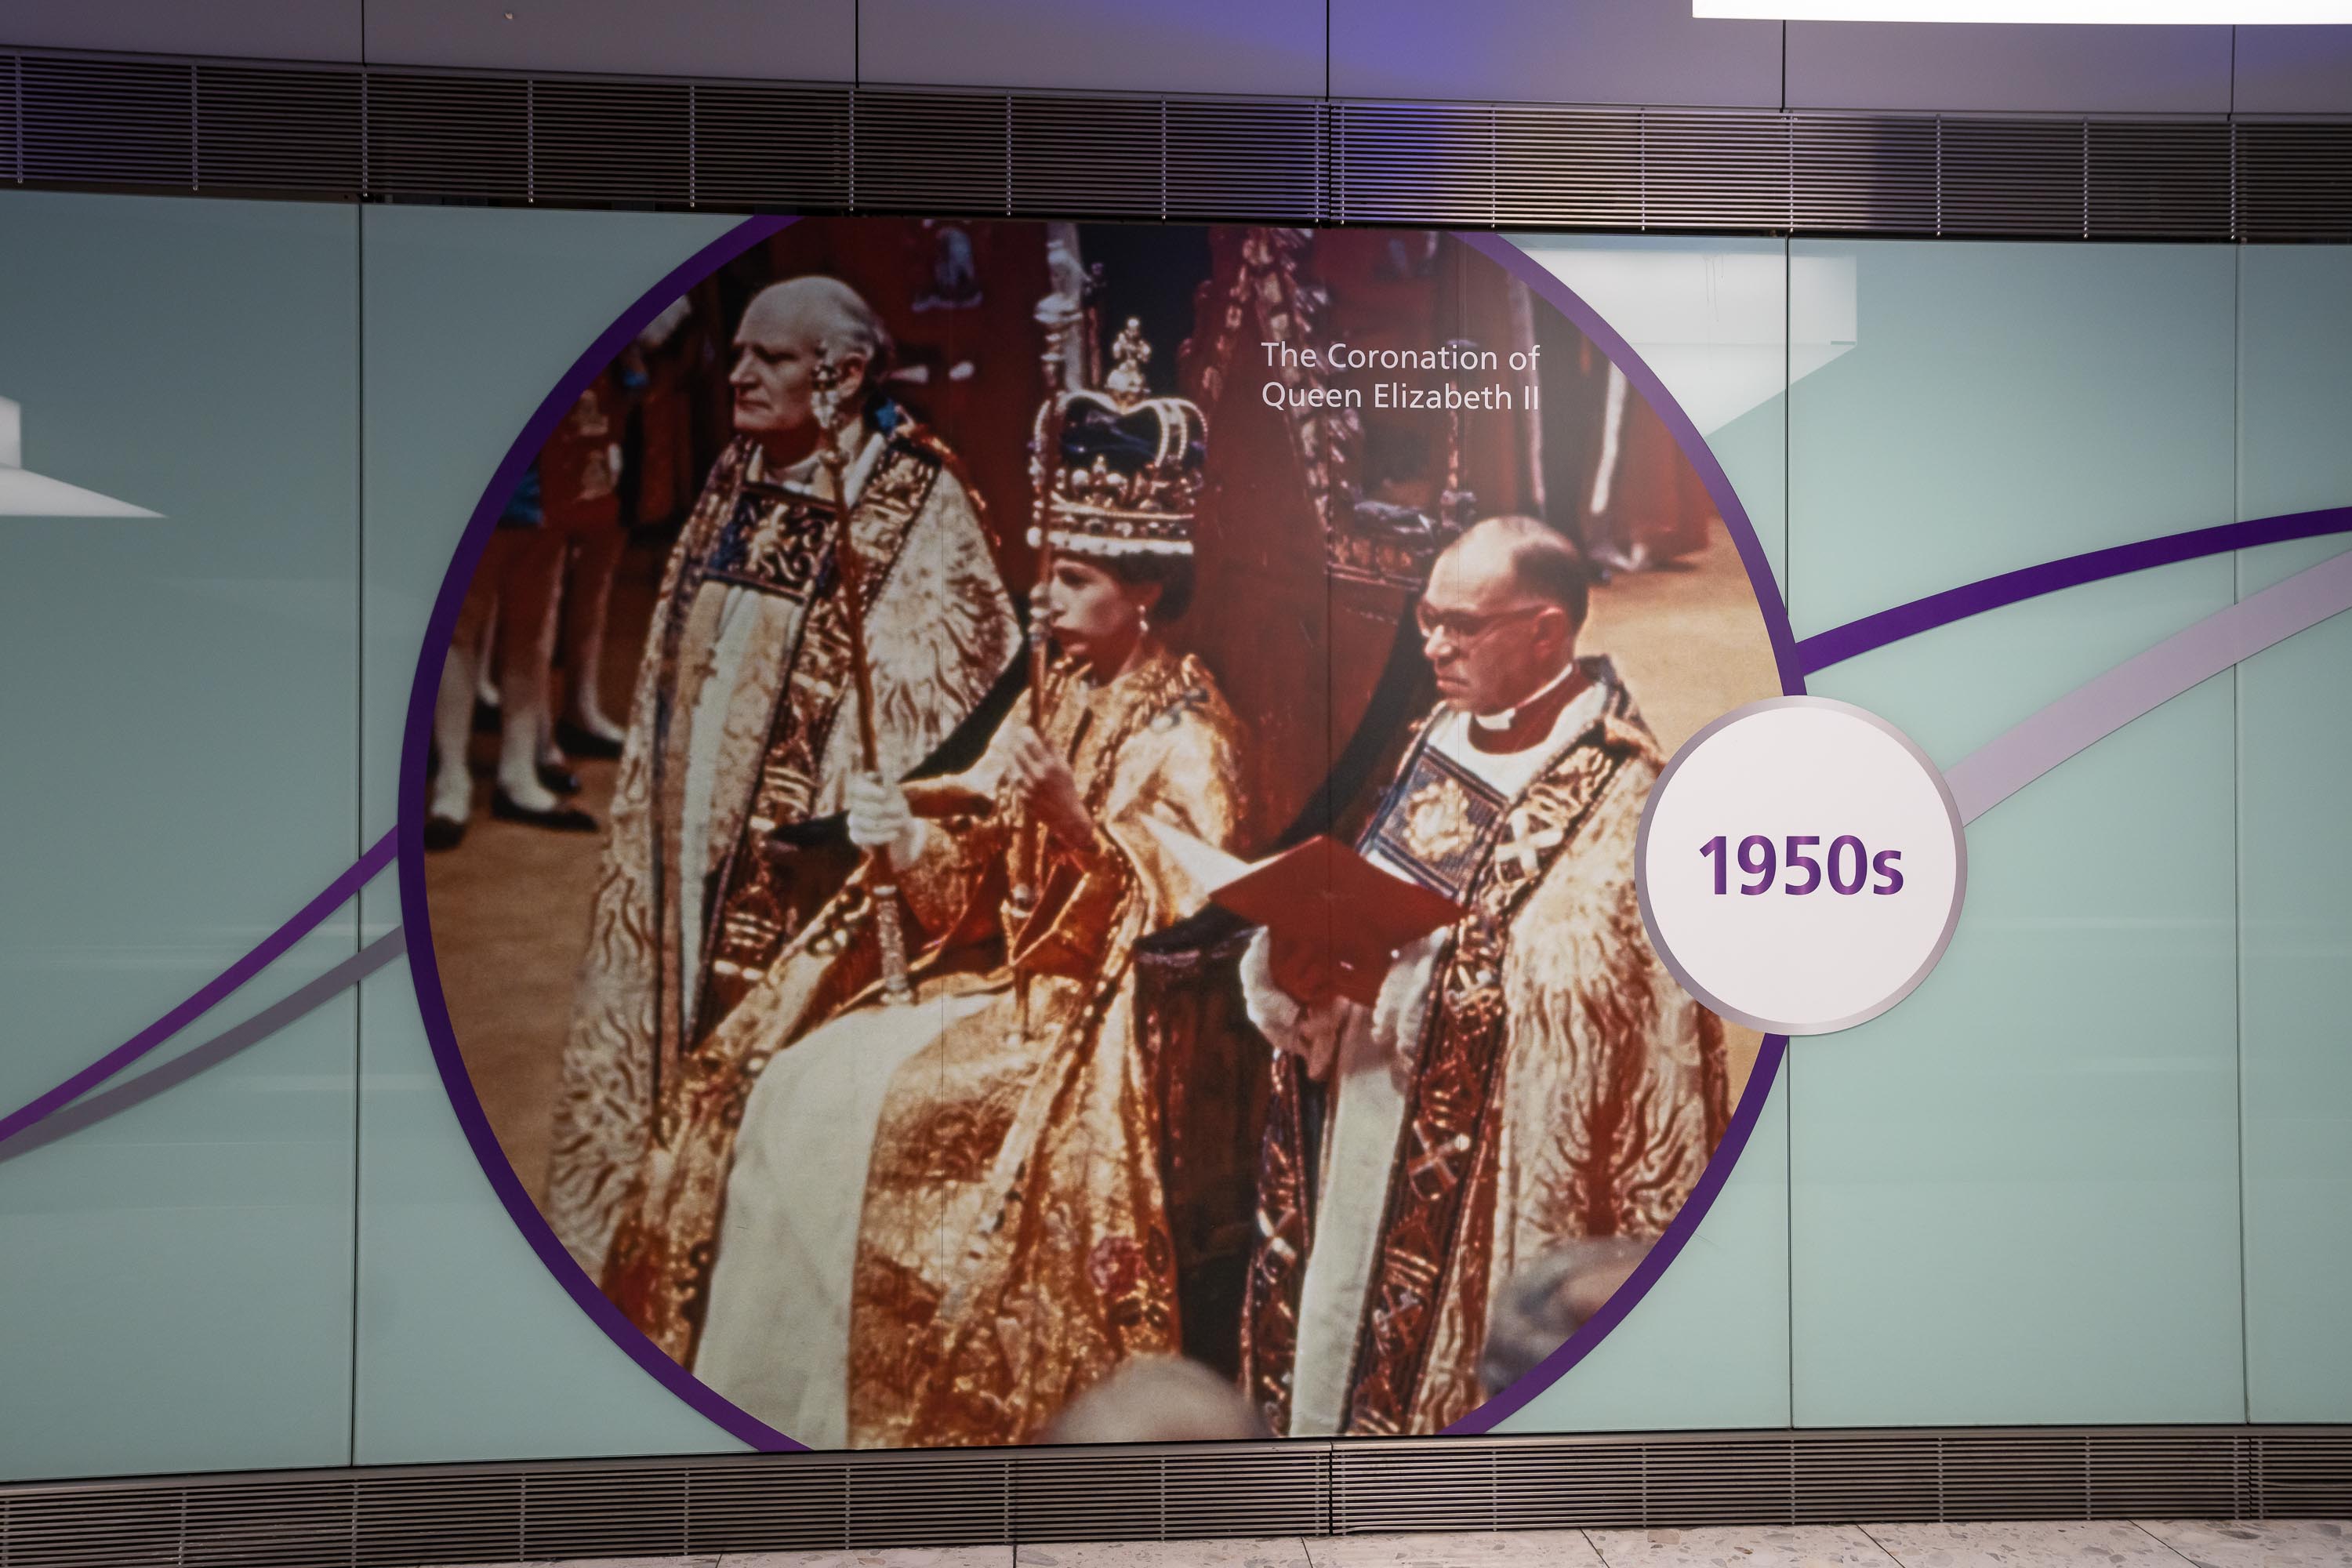 An image of the queen from an exhibit at the airport